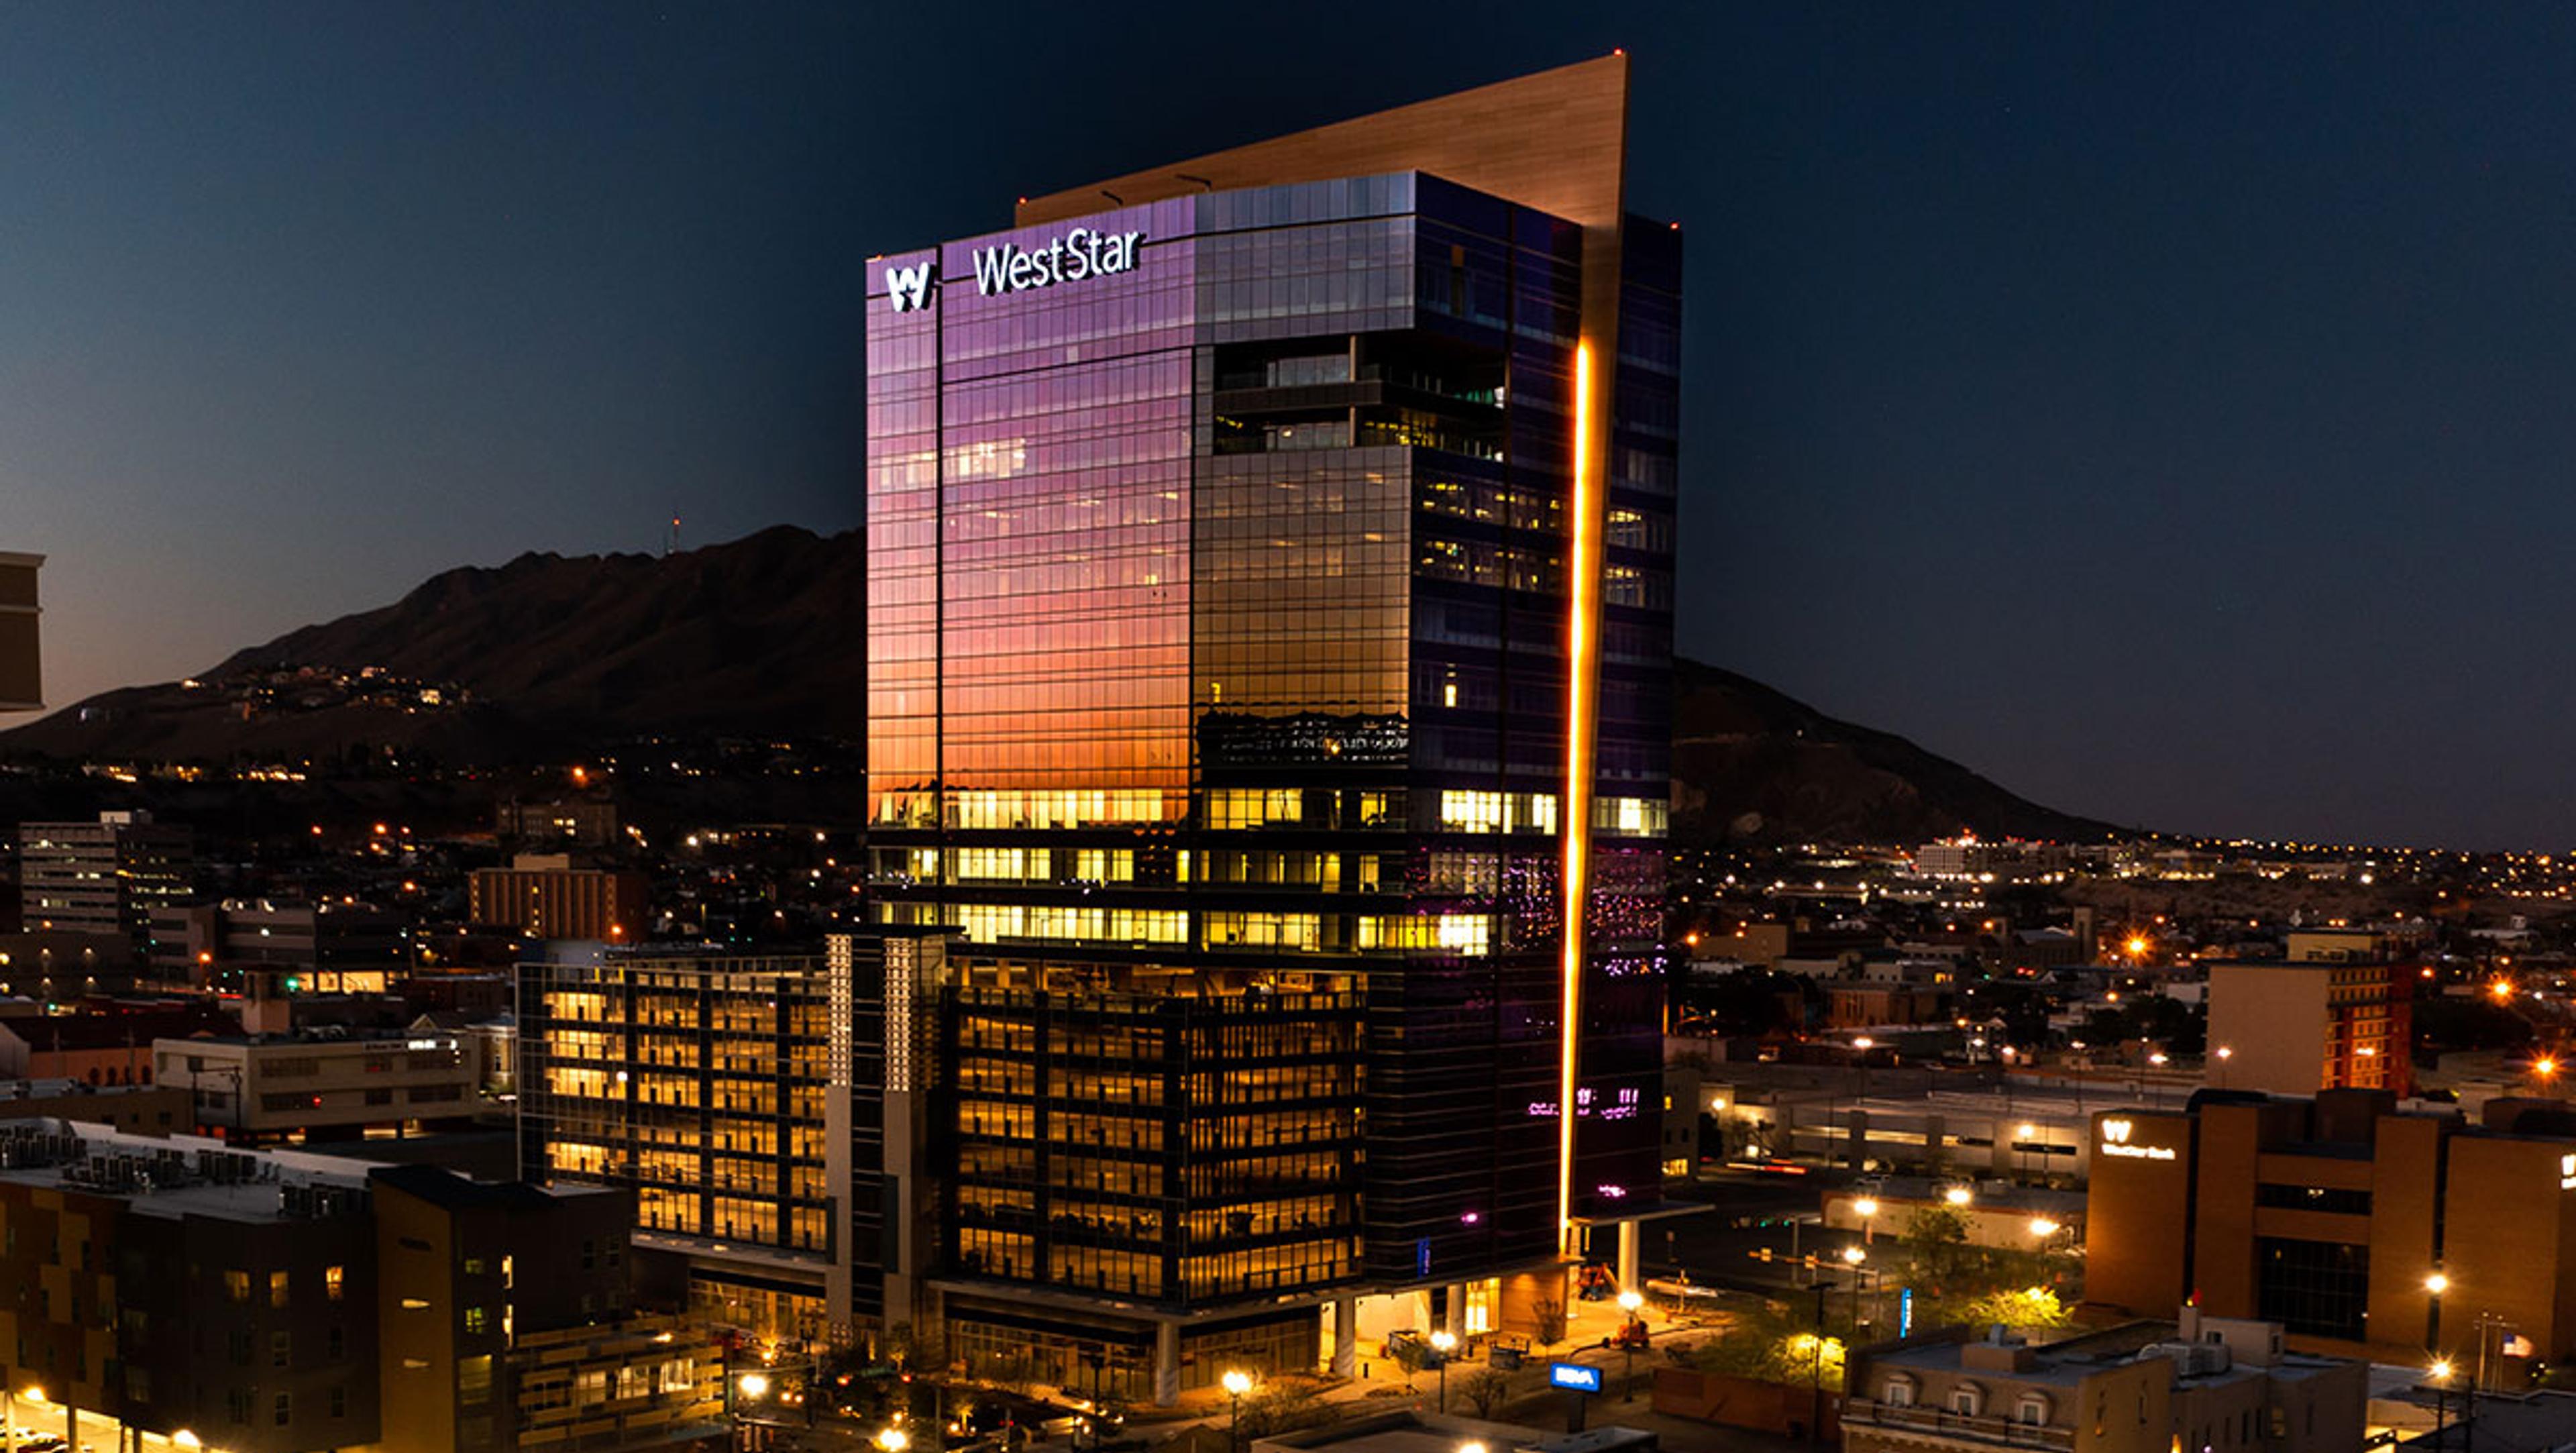 The Corporate office for Hunt Companies is located in the West Star Tower in El Paso, Texas.